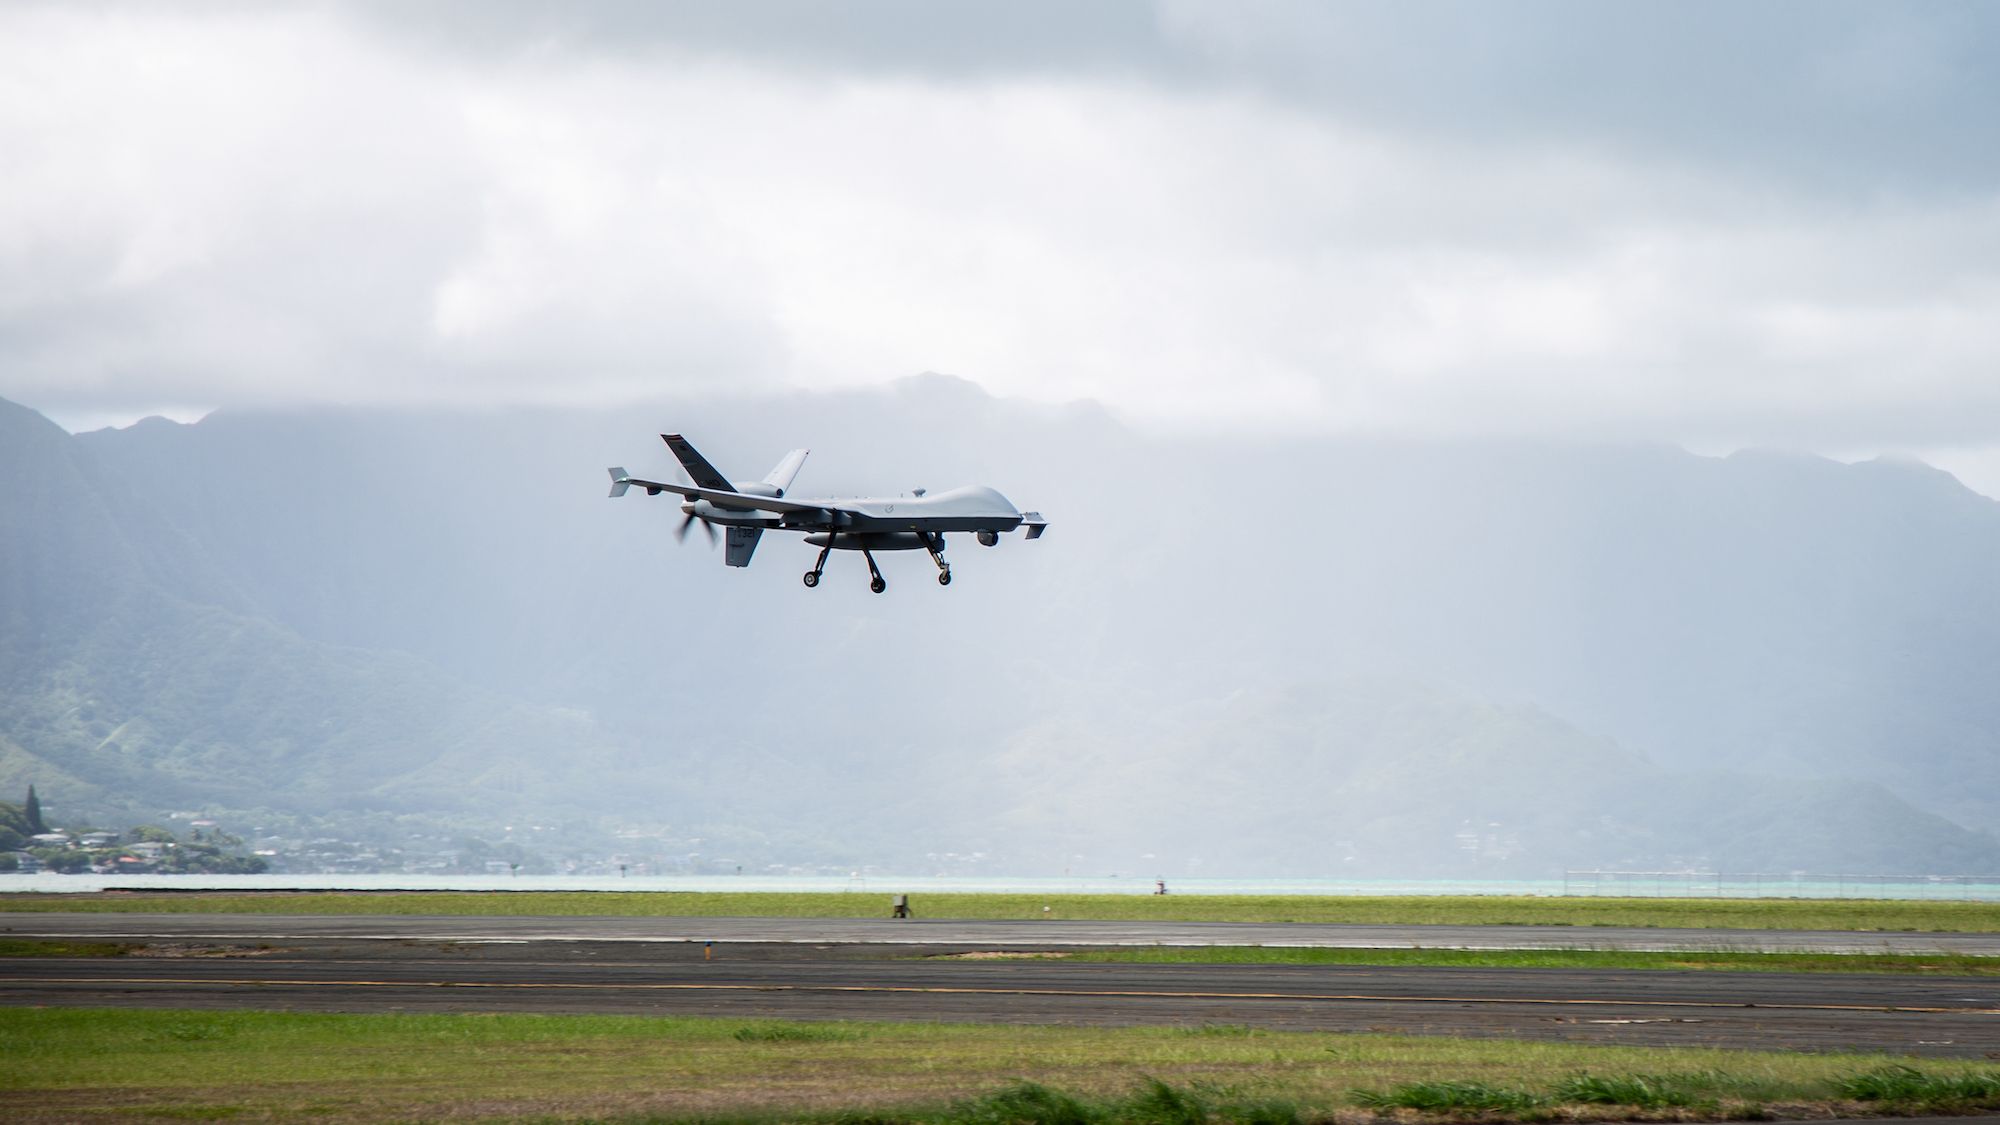 The US military has been testing out Reaper drones over Hawaii